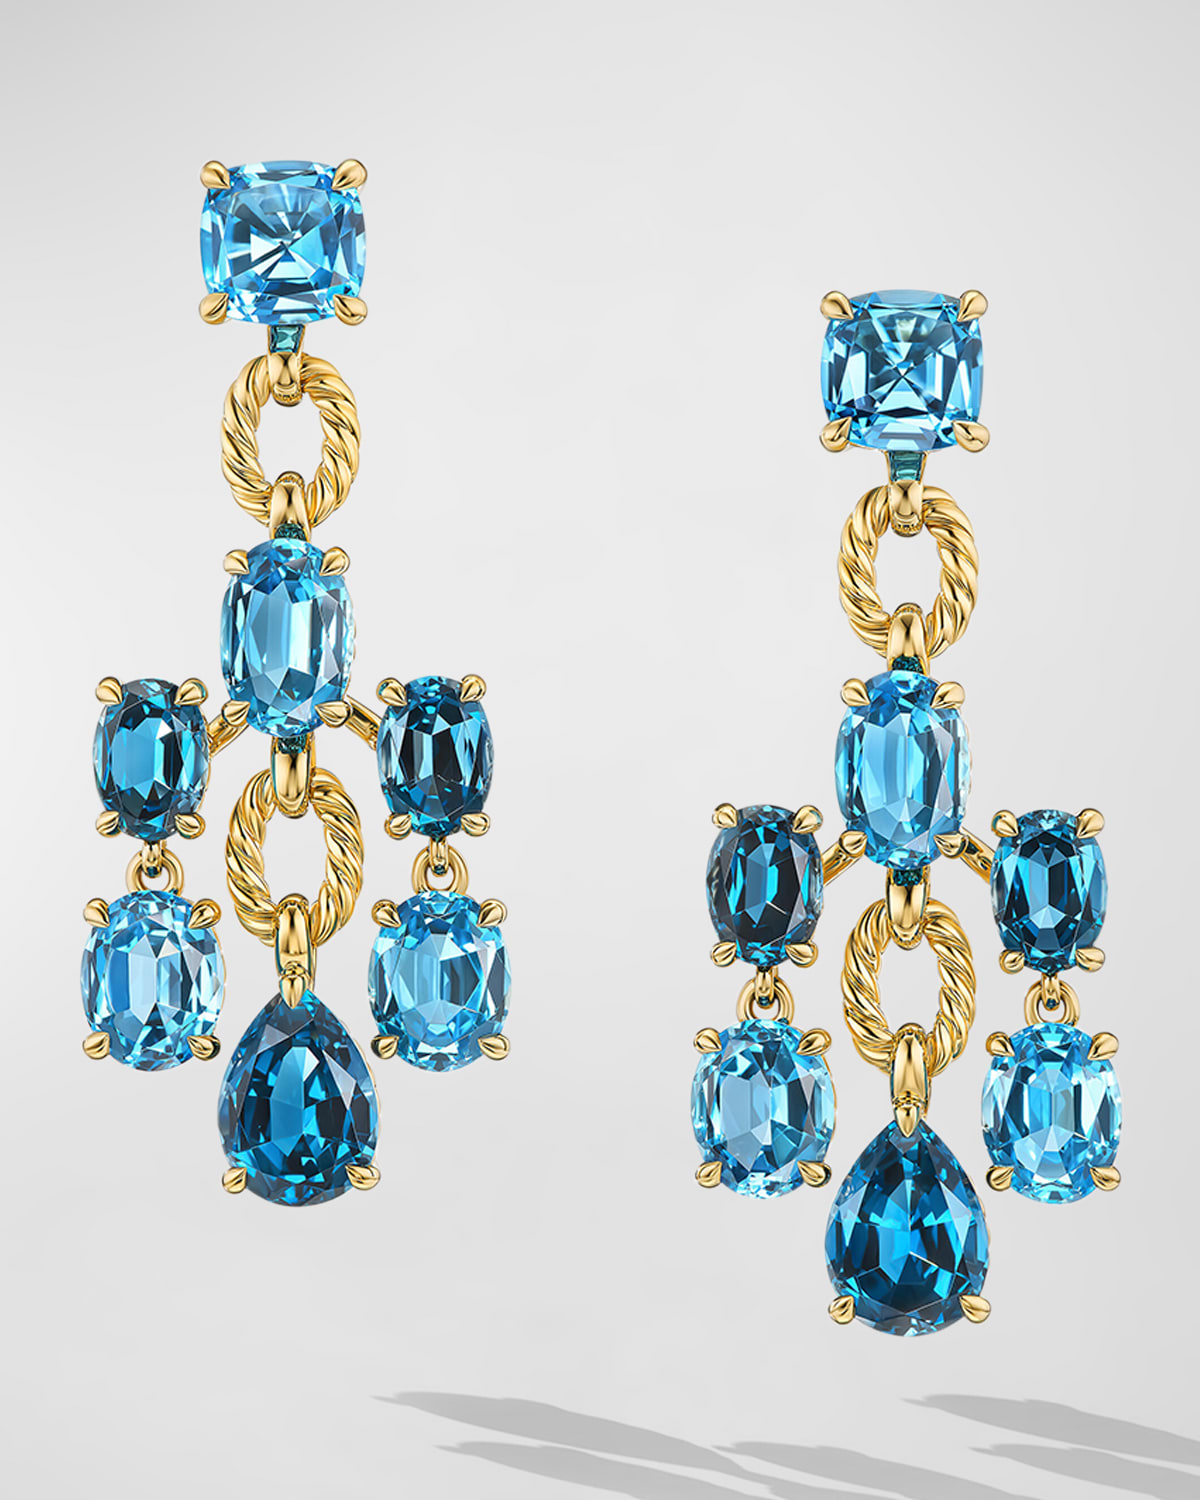 Marbella Statement Earrings with Gemstones in 18K Gold, 57mm